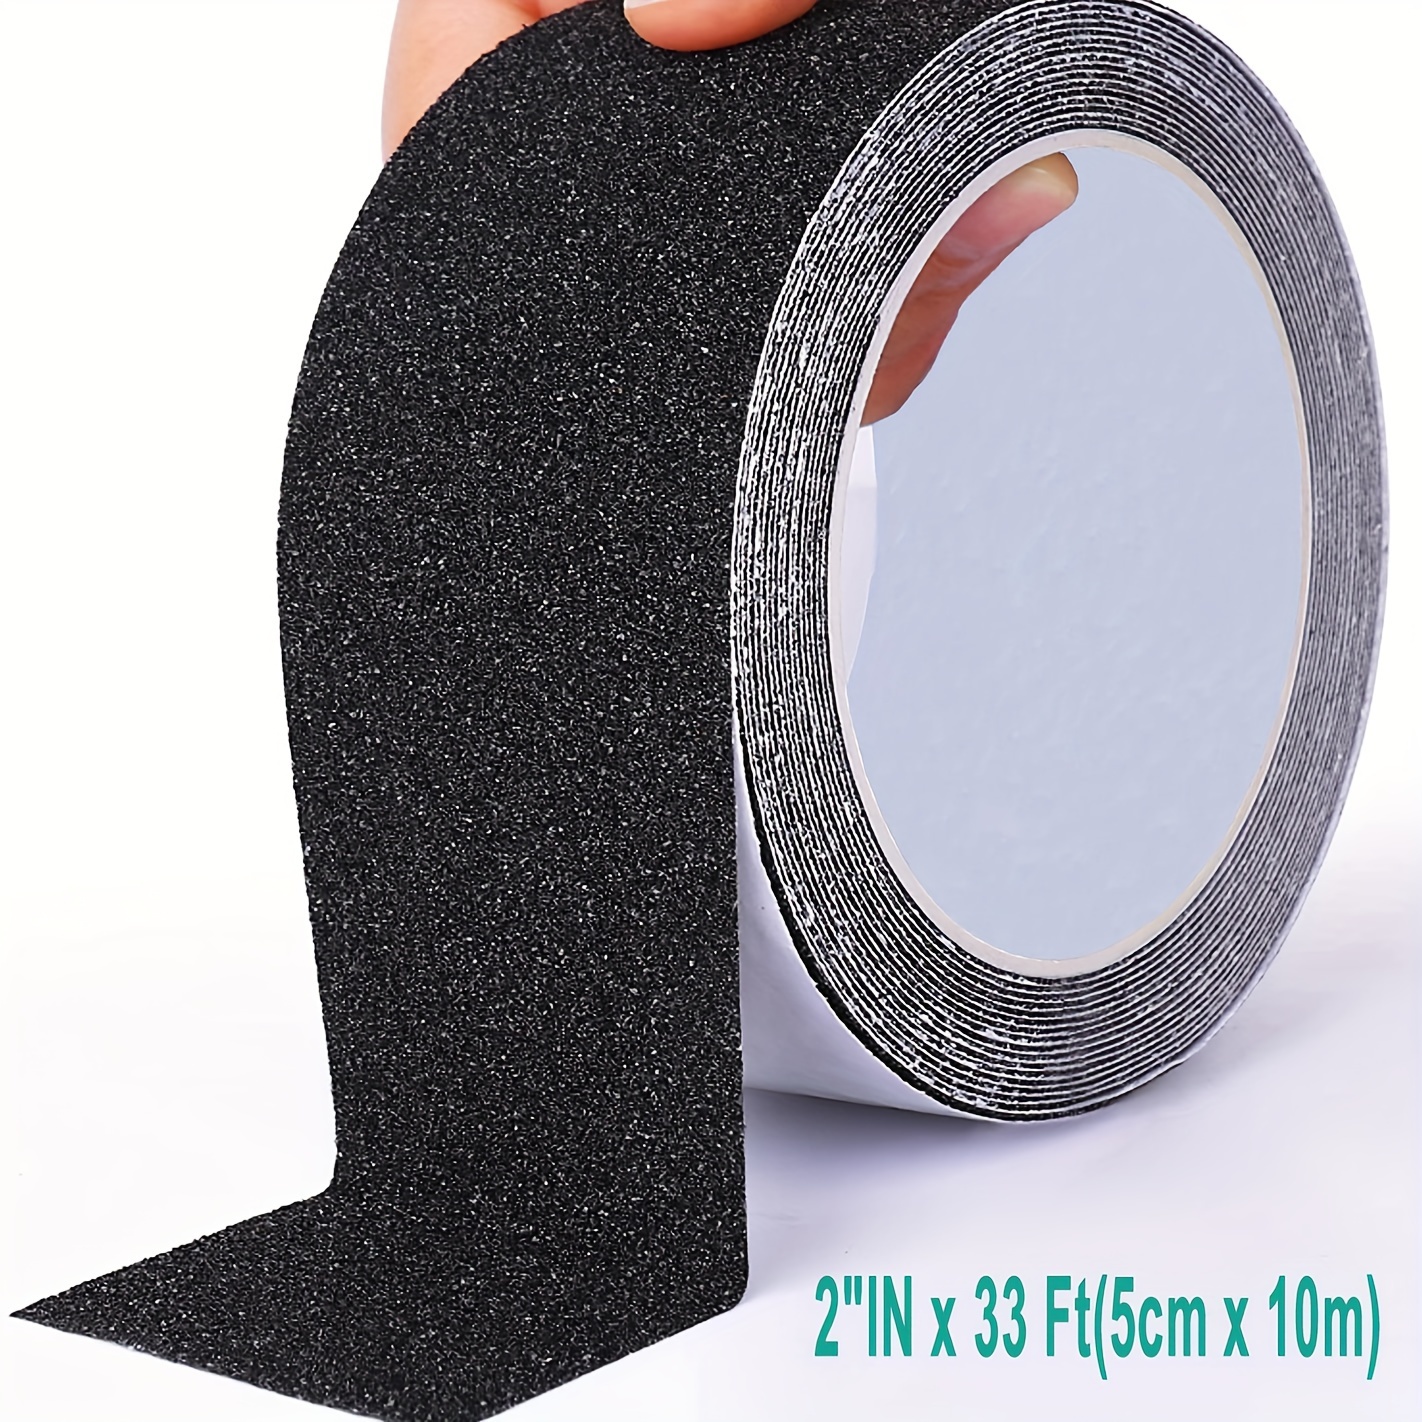 1pc Grip Tape, Heavy Duty Anti Slip Tape For Stairs, Outdoor/Indoor  Waterproof Safety Non Skid Roll For Stair Steps Ramp, Traction Tread  Staircases Gr